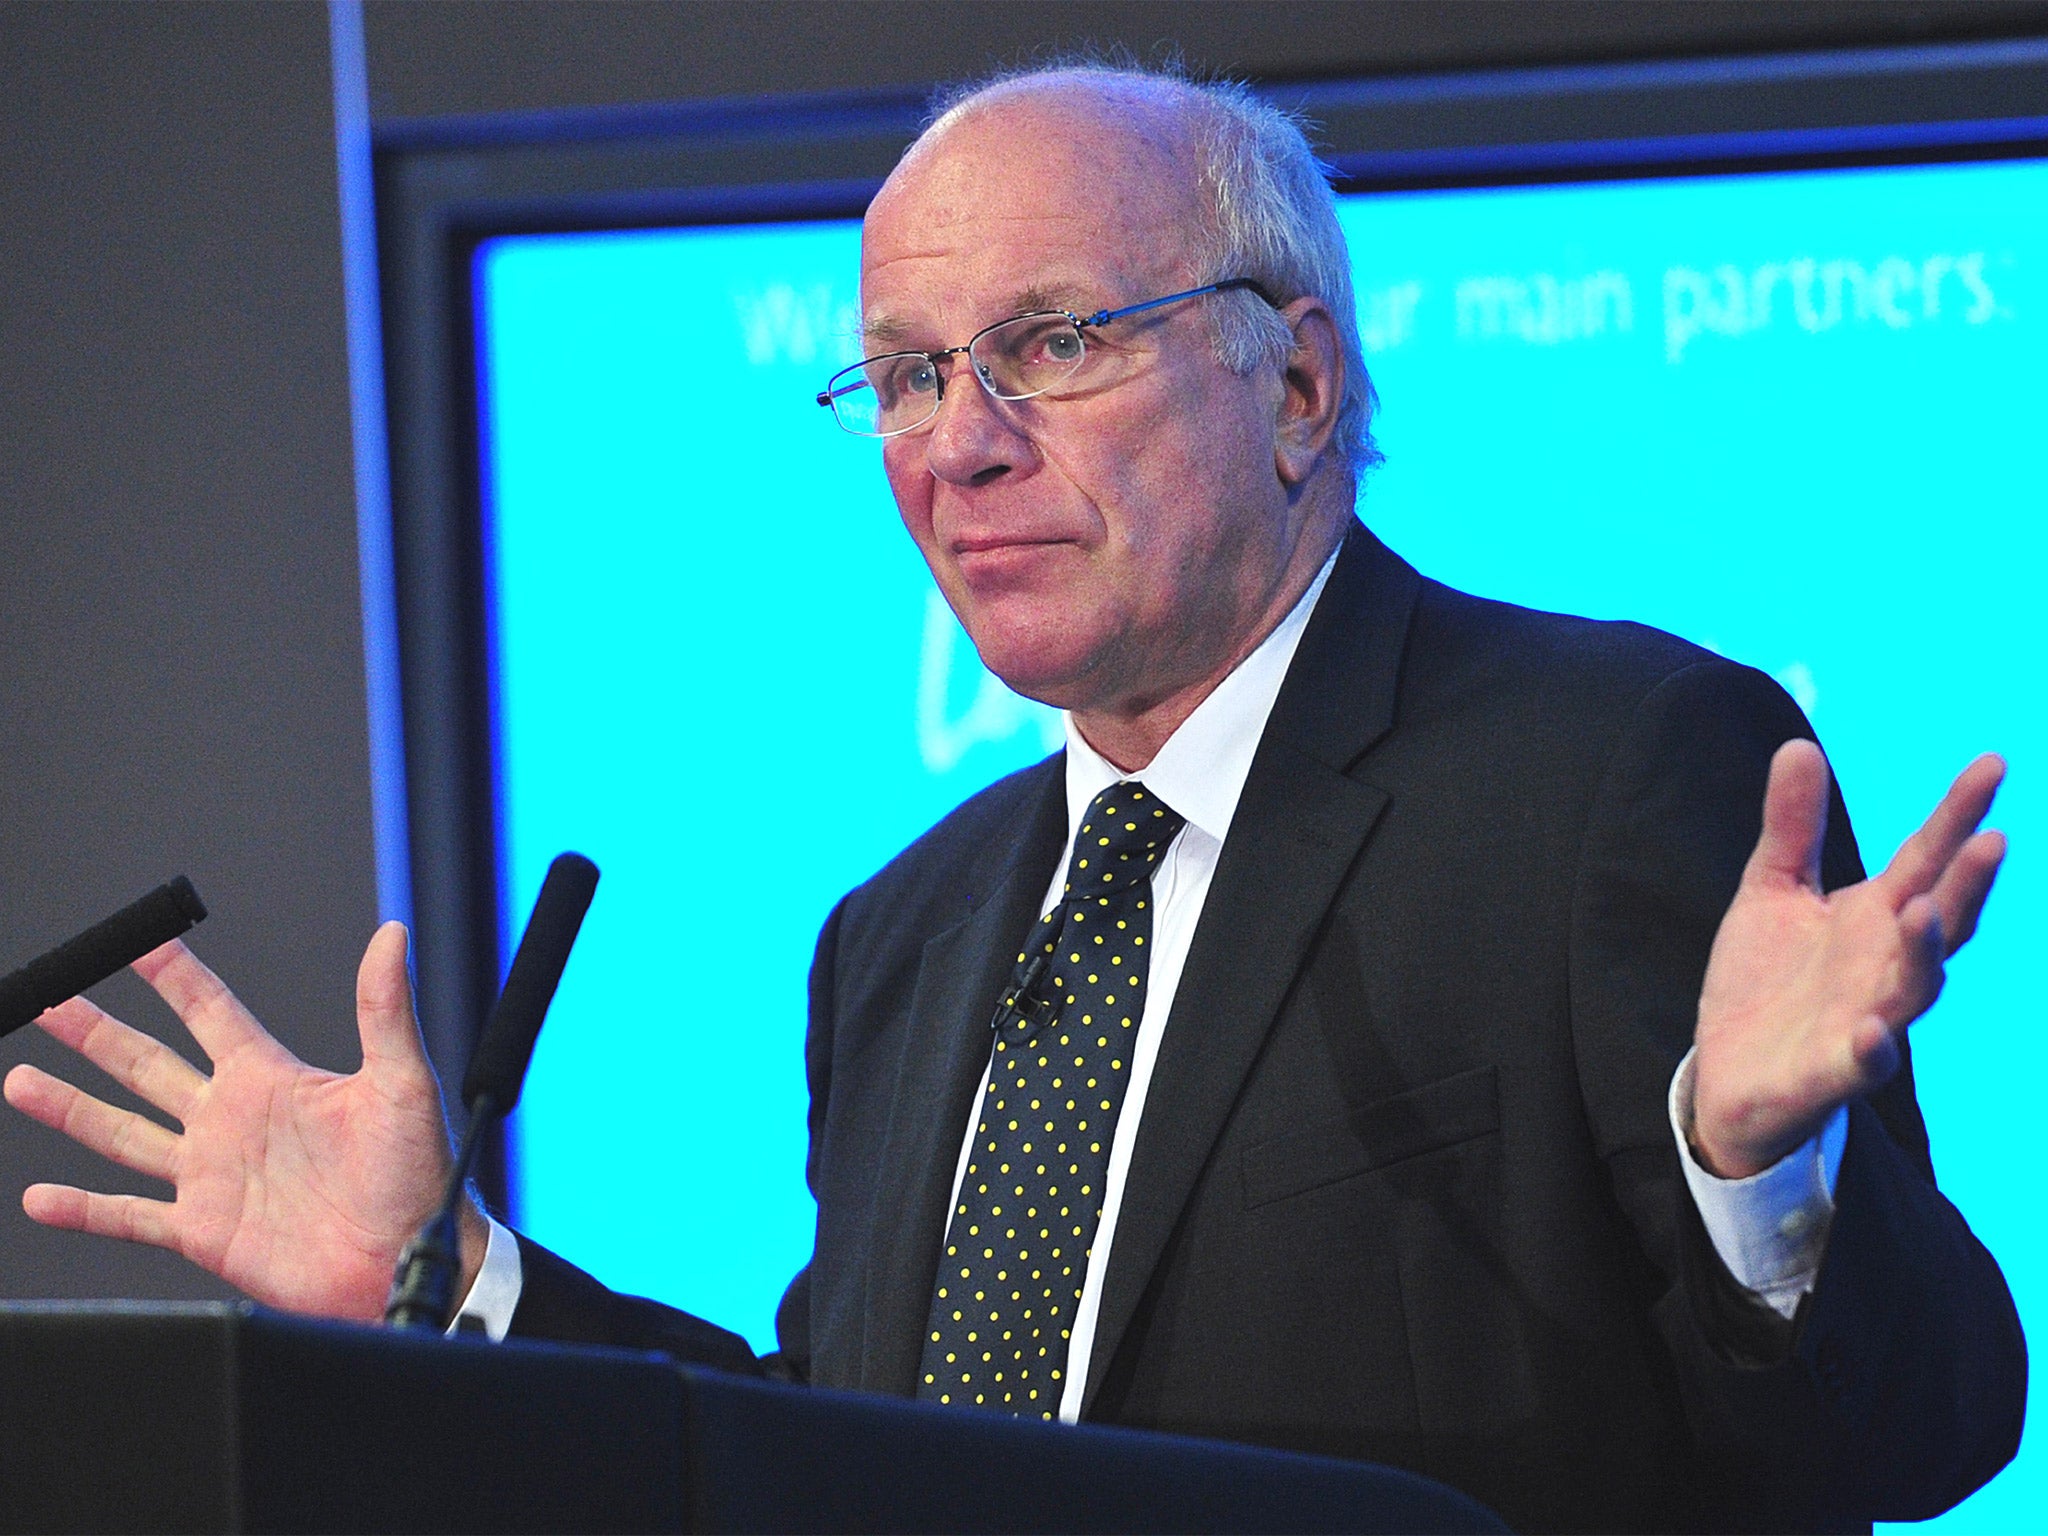 FA chairman Greg Dyke sees his role as presenting radical solutions to the longstanding issues faced by the English game